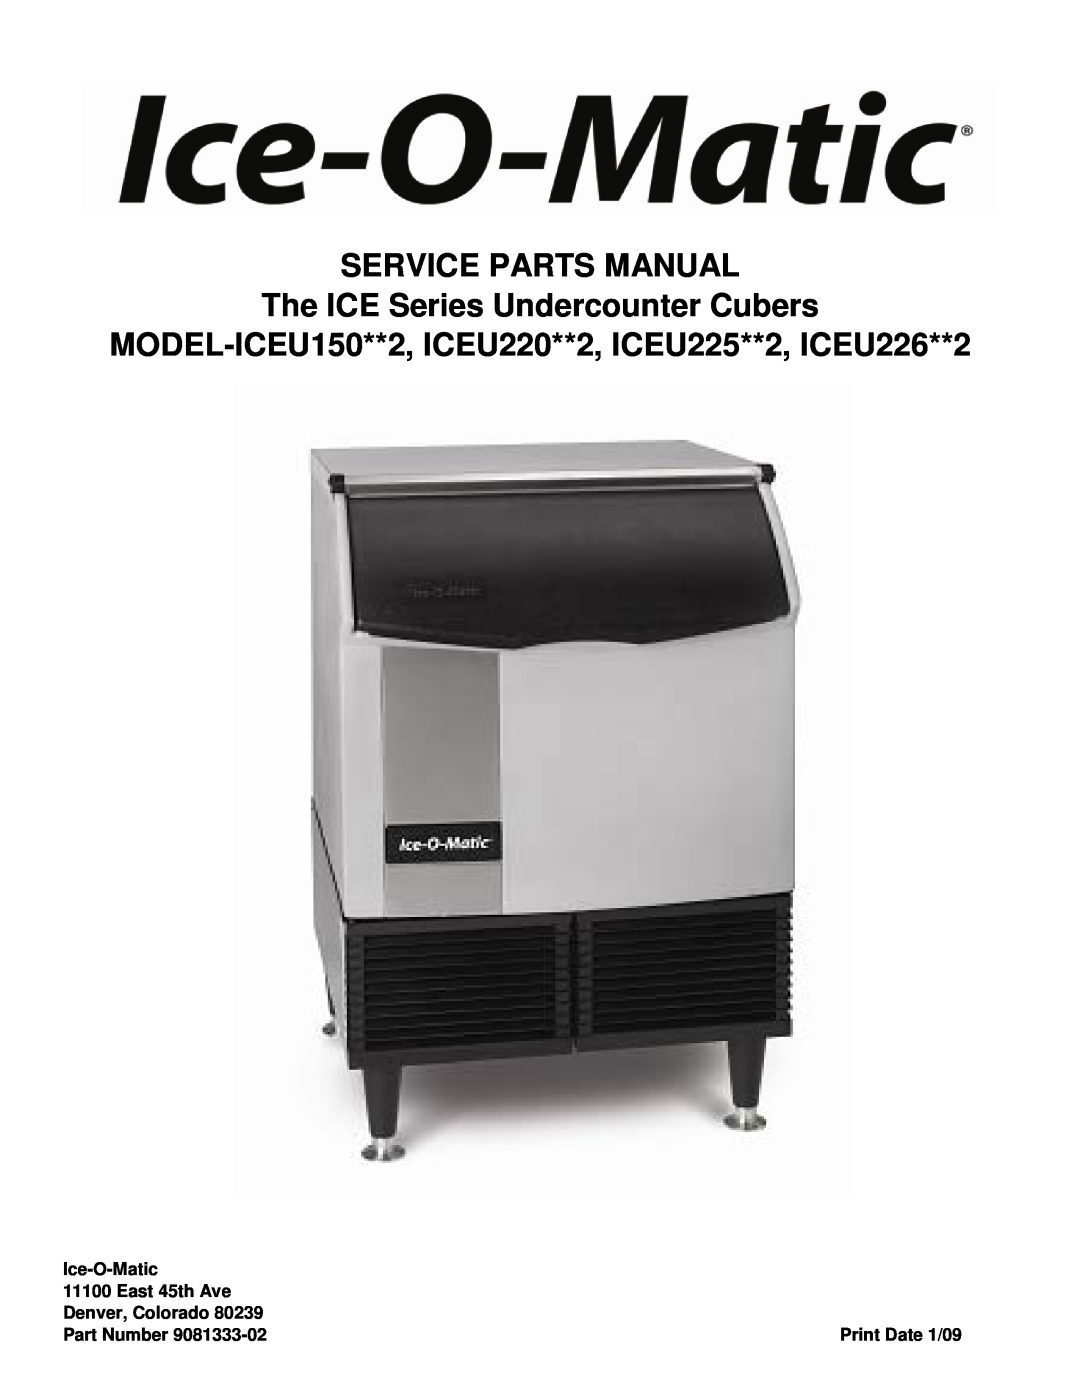 Ice-O-Matic ICEU220**2 manual Service Parts Manual, The ICE Series Undercounter Cubers, Ice-O-Matic, East 45th Ave 